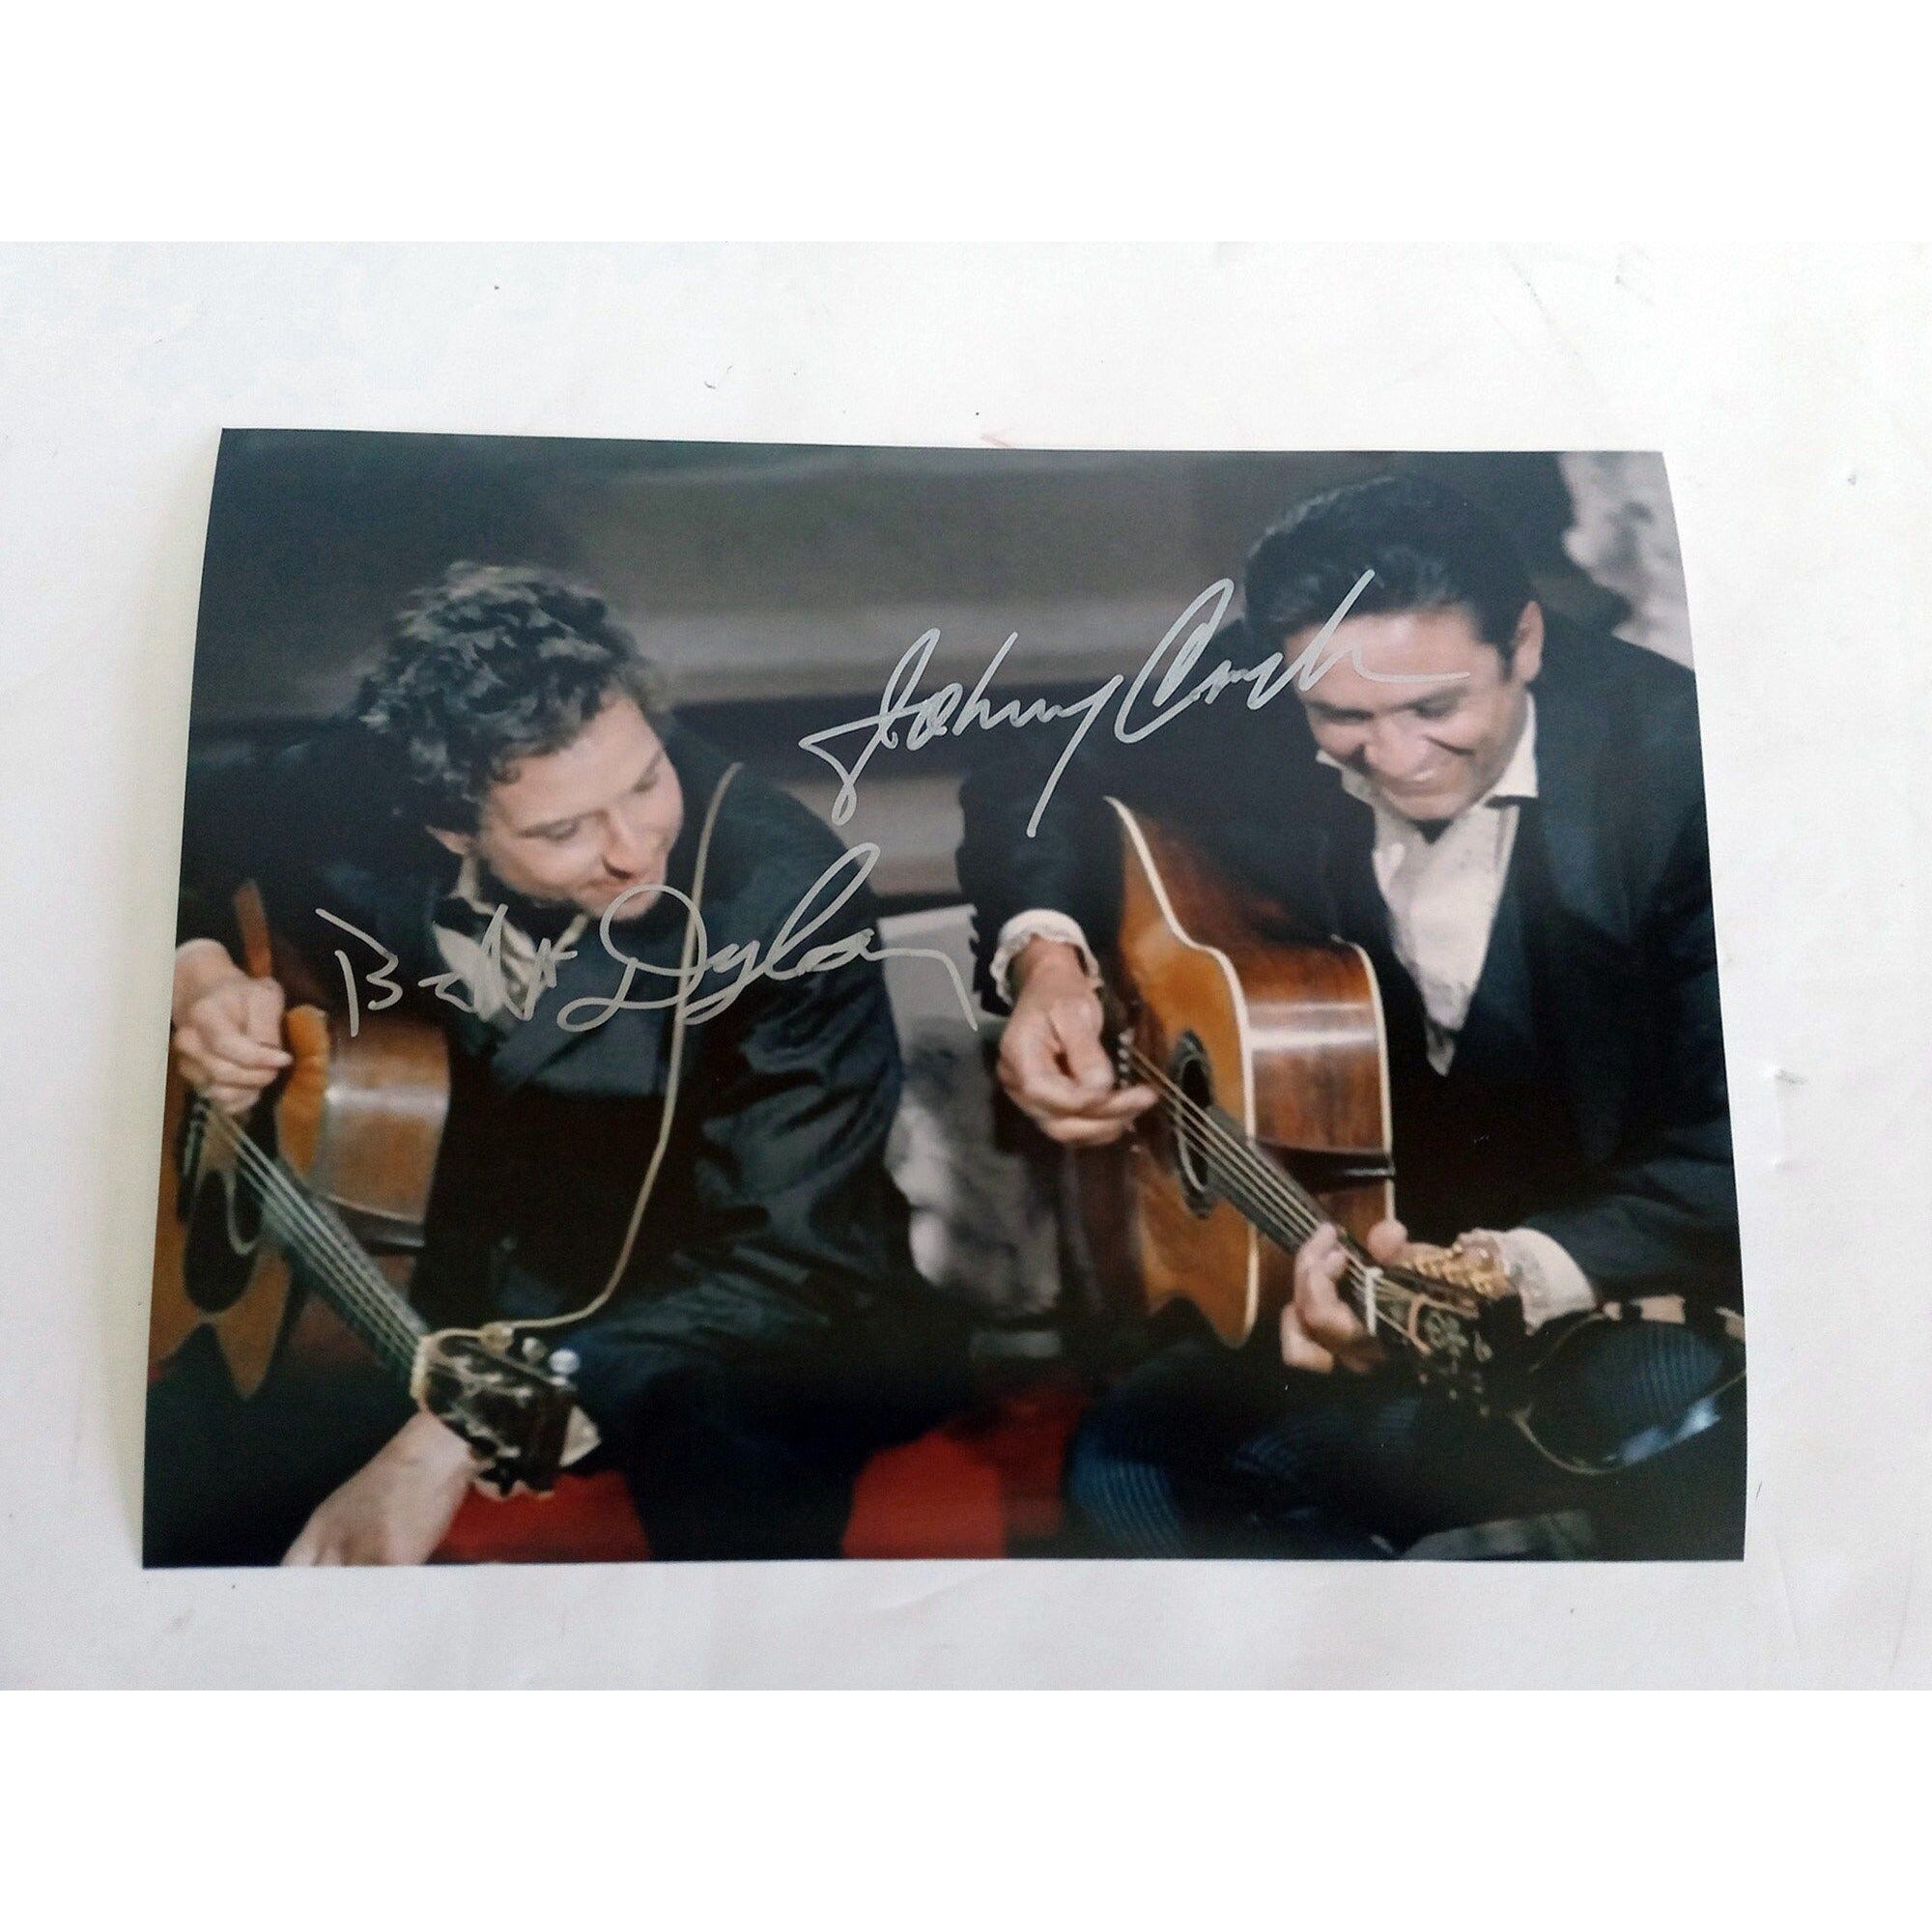 Johnny Cash and Bob Dylan 8 by 10 signed photo with proof